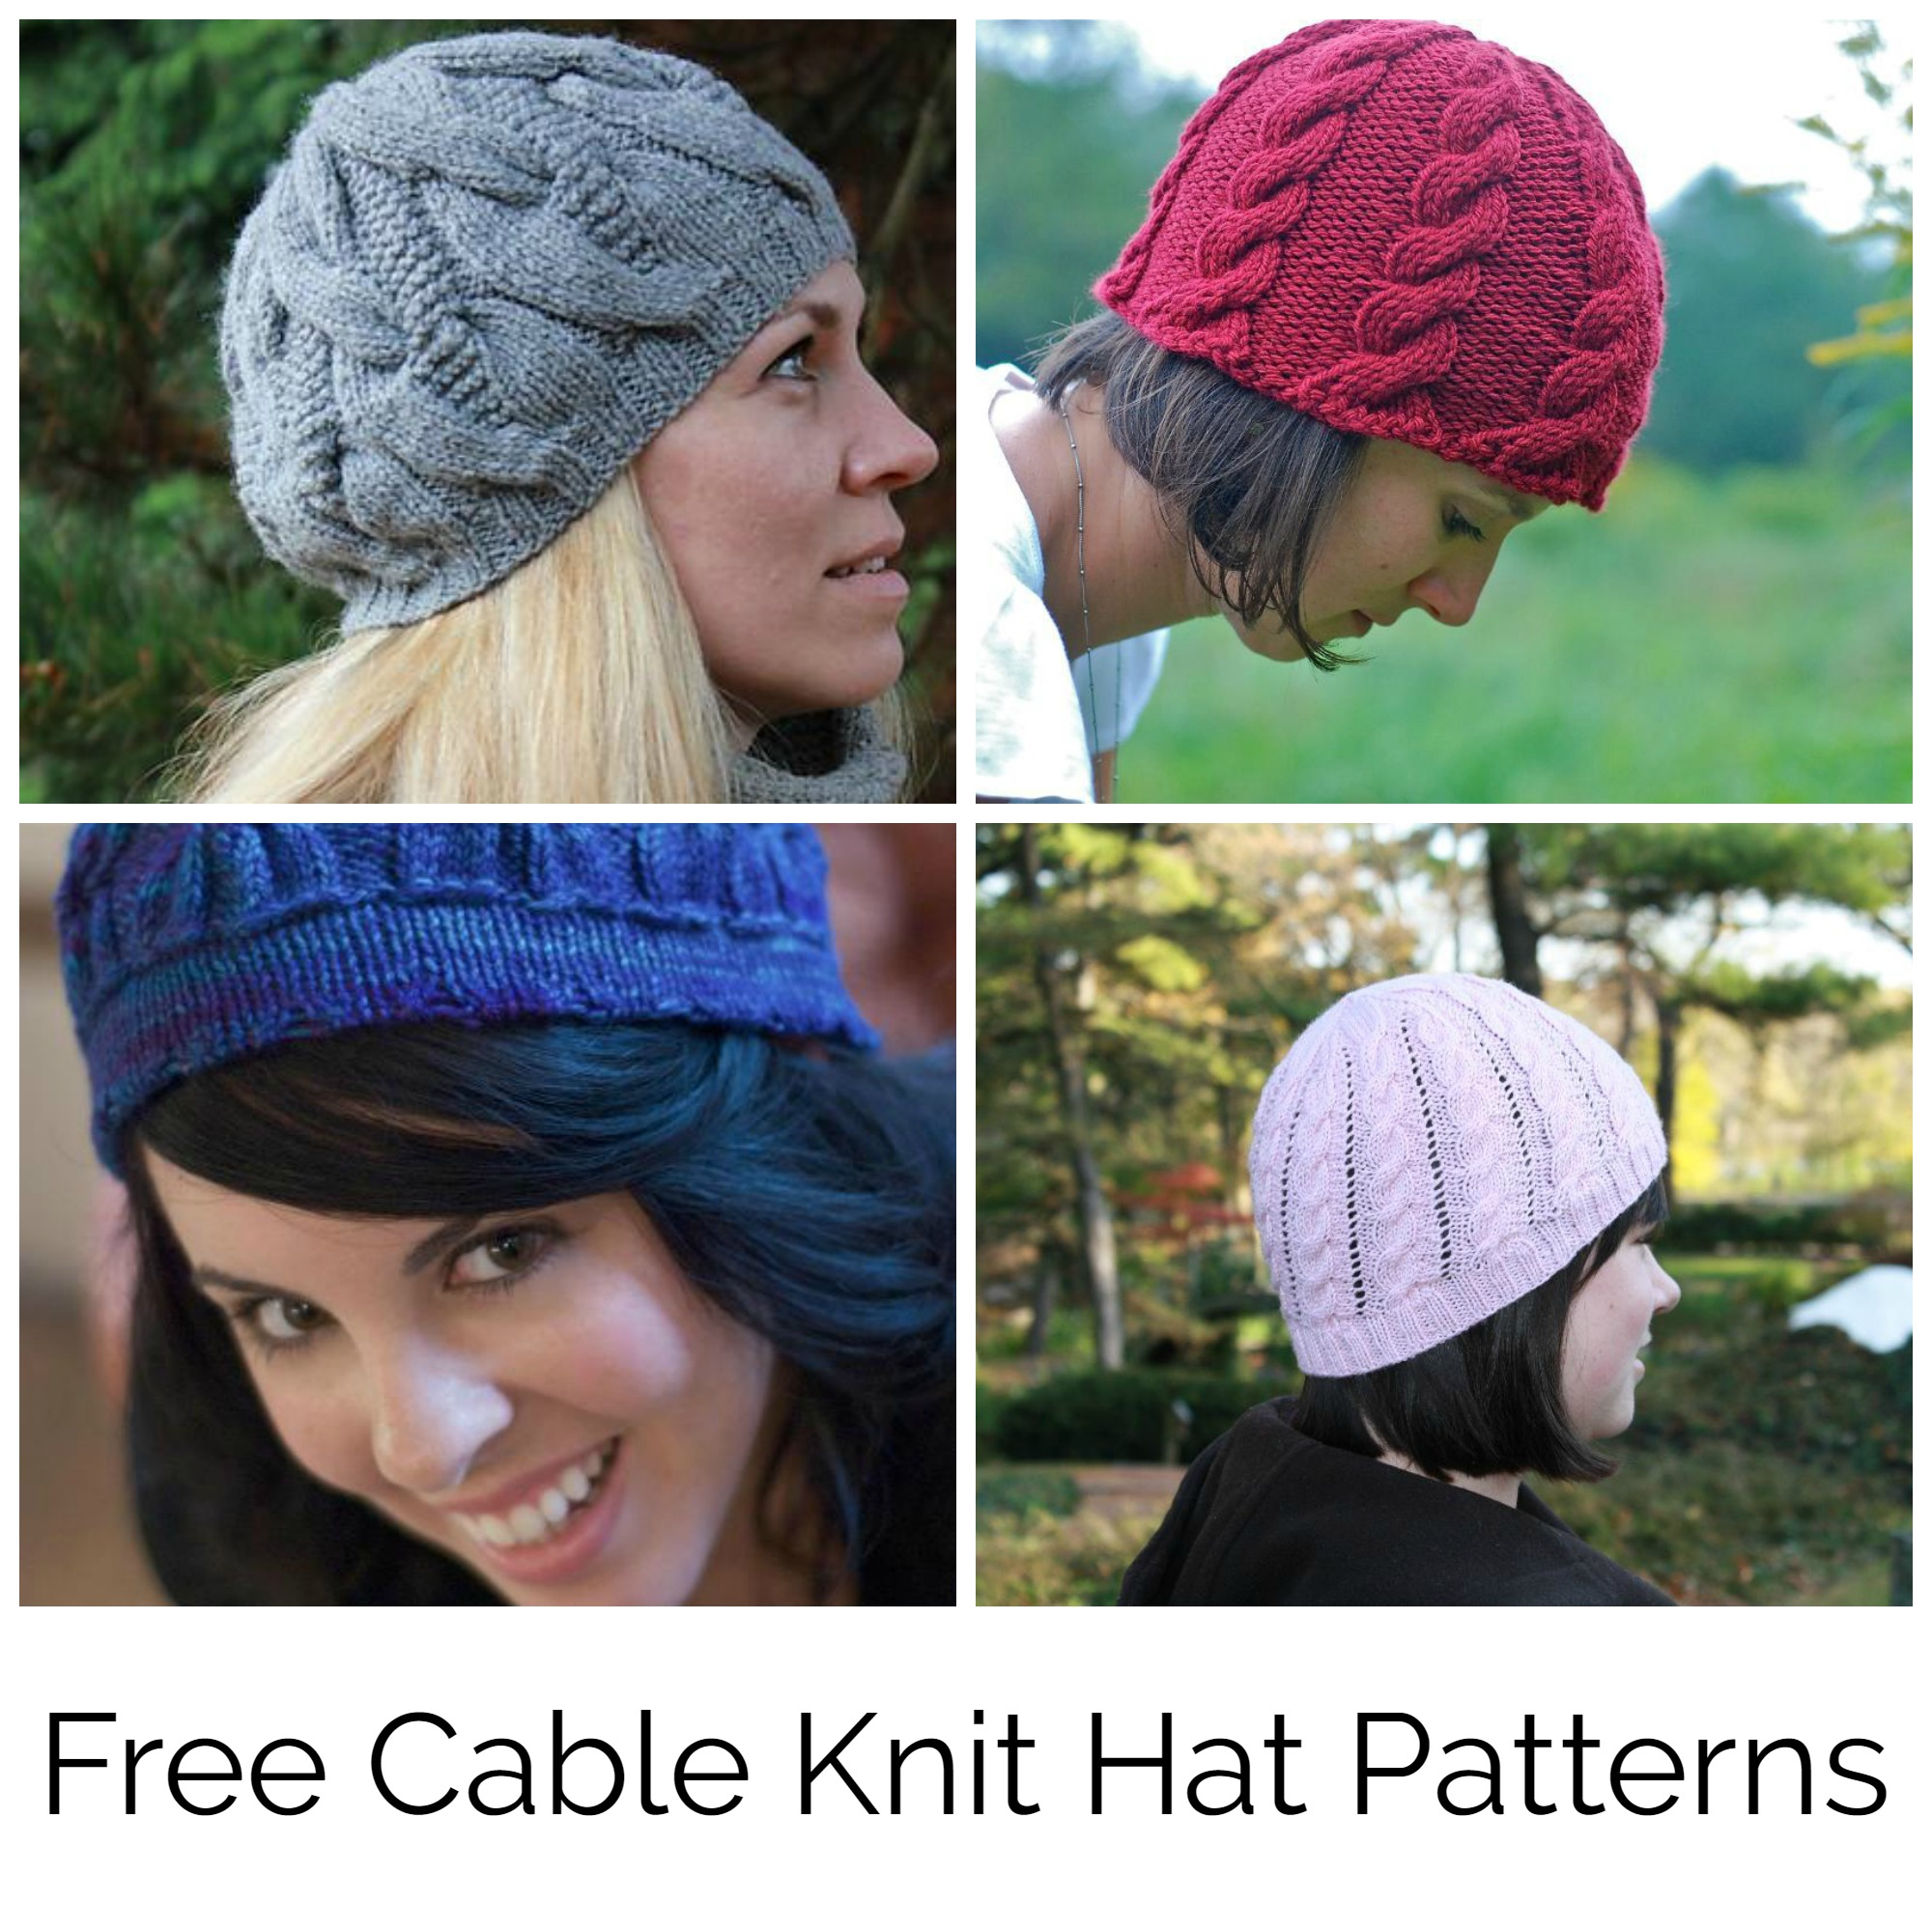 Knitted Beanie Hat Pattern Find Your Favorite Free Cable Knit Hat Pattern